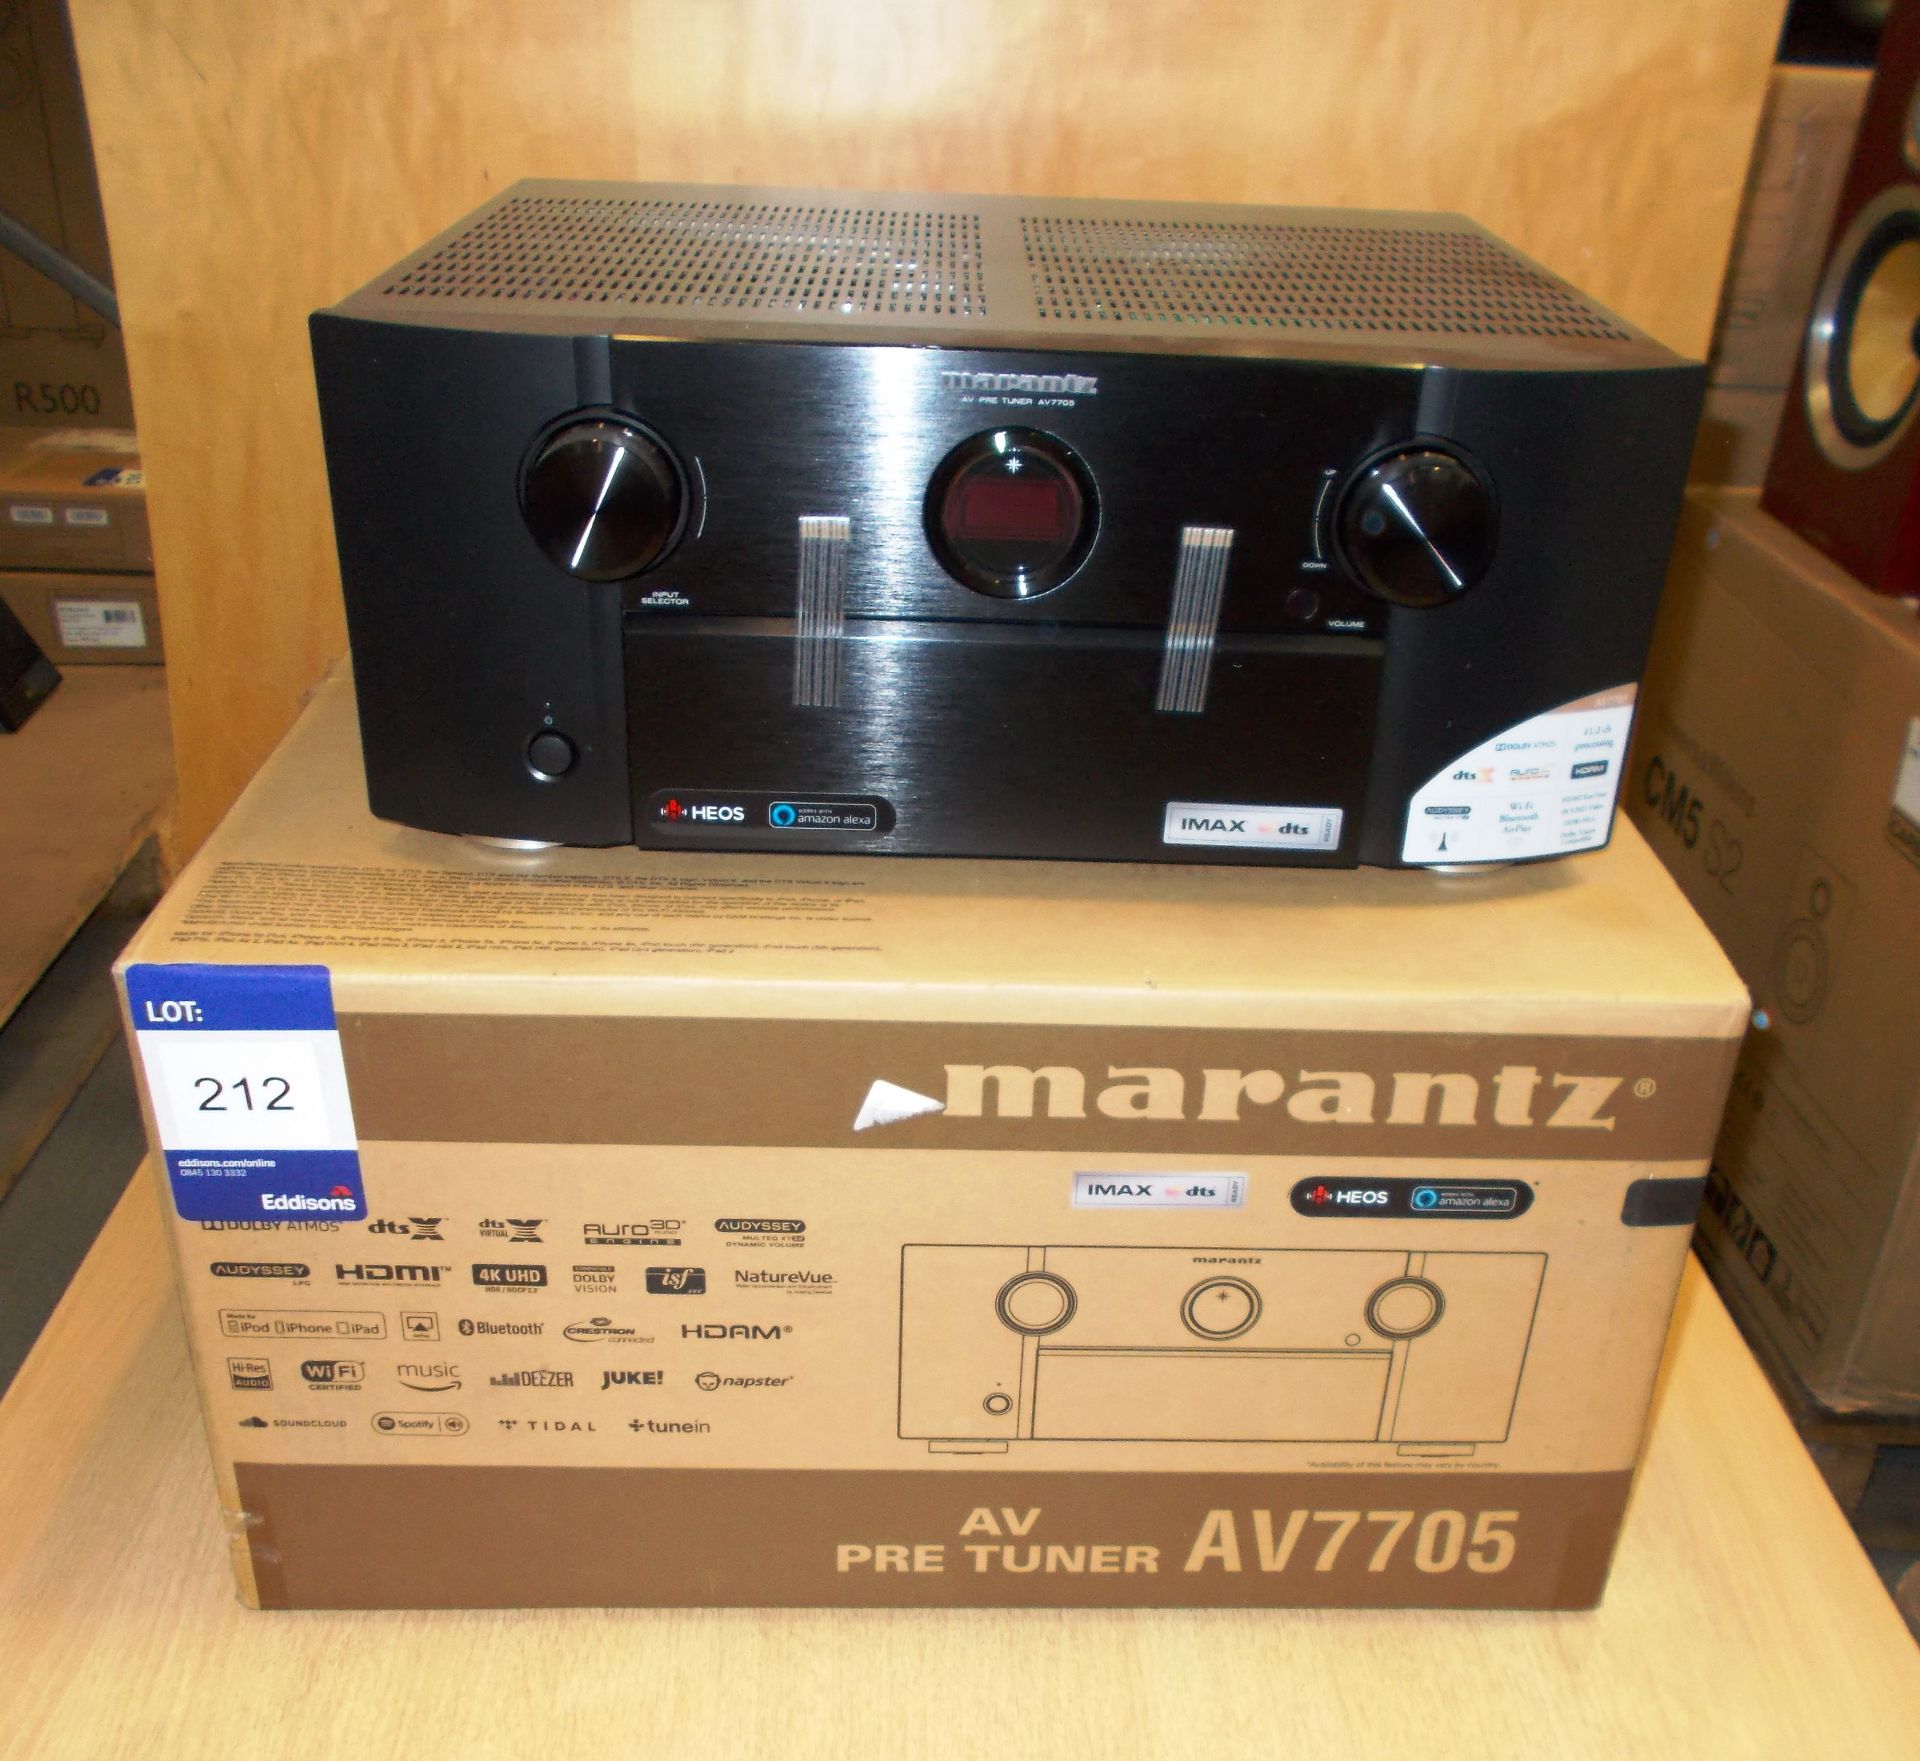 Marantz AV 7705 Pre-Tuner (on display) - RRP £1,900 (collection Monday 29 April ONLY - please do not